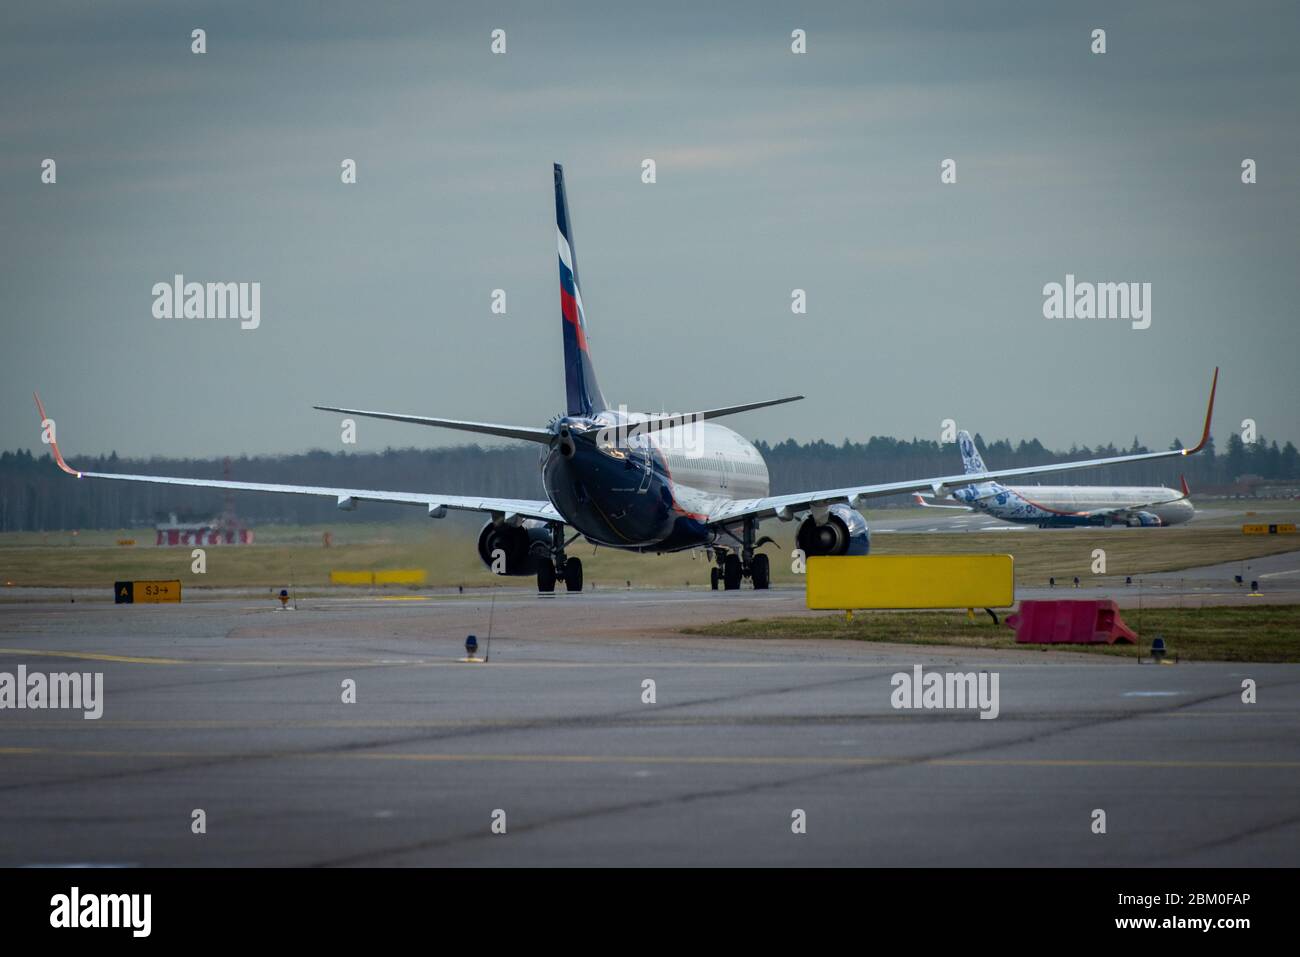 October 29, 2019, Moscow, Russia. Plane  Aeroflot - Russian Airlines at Sheremetyevo airport in Moscow. Stock Photo